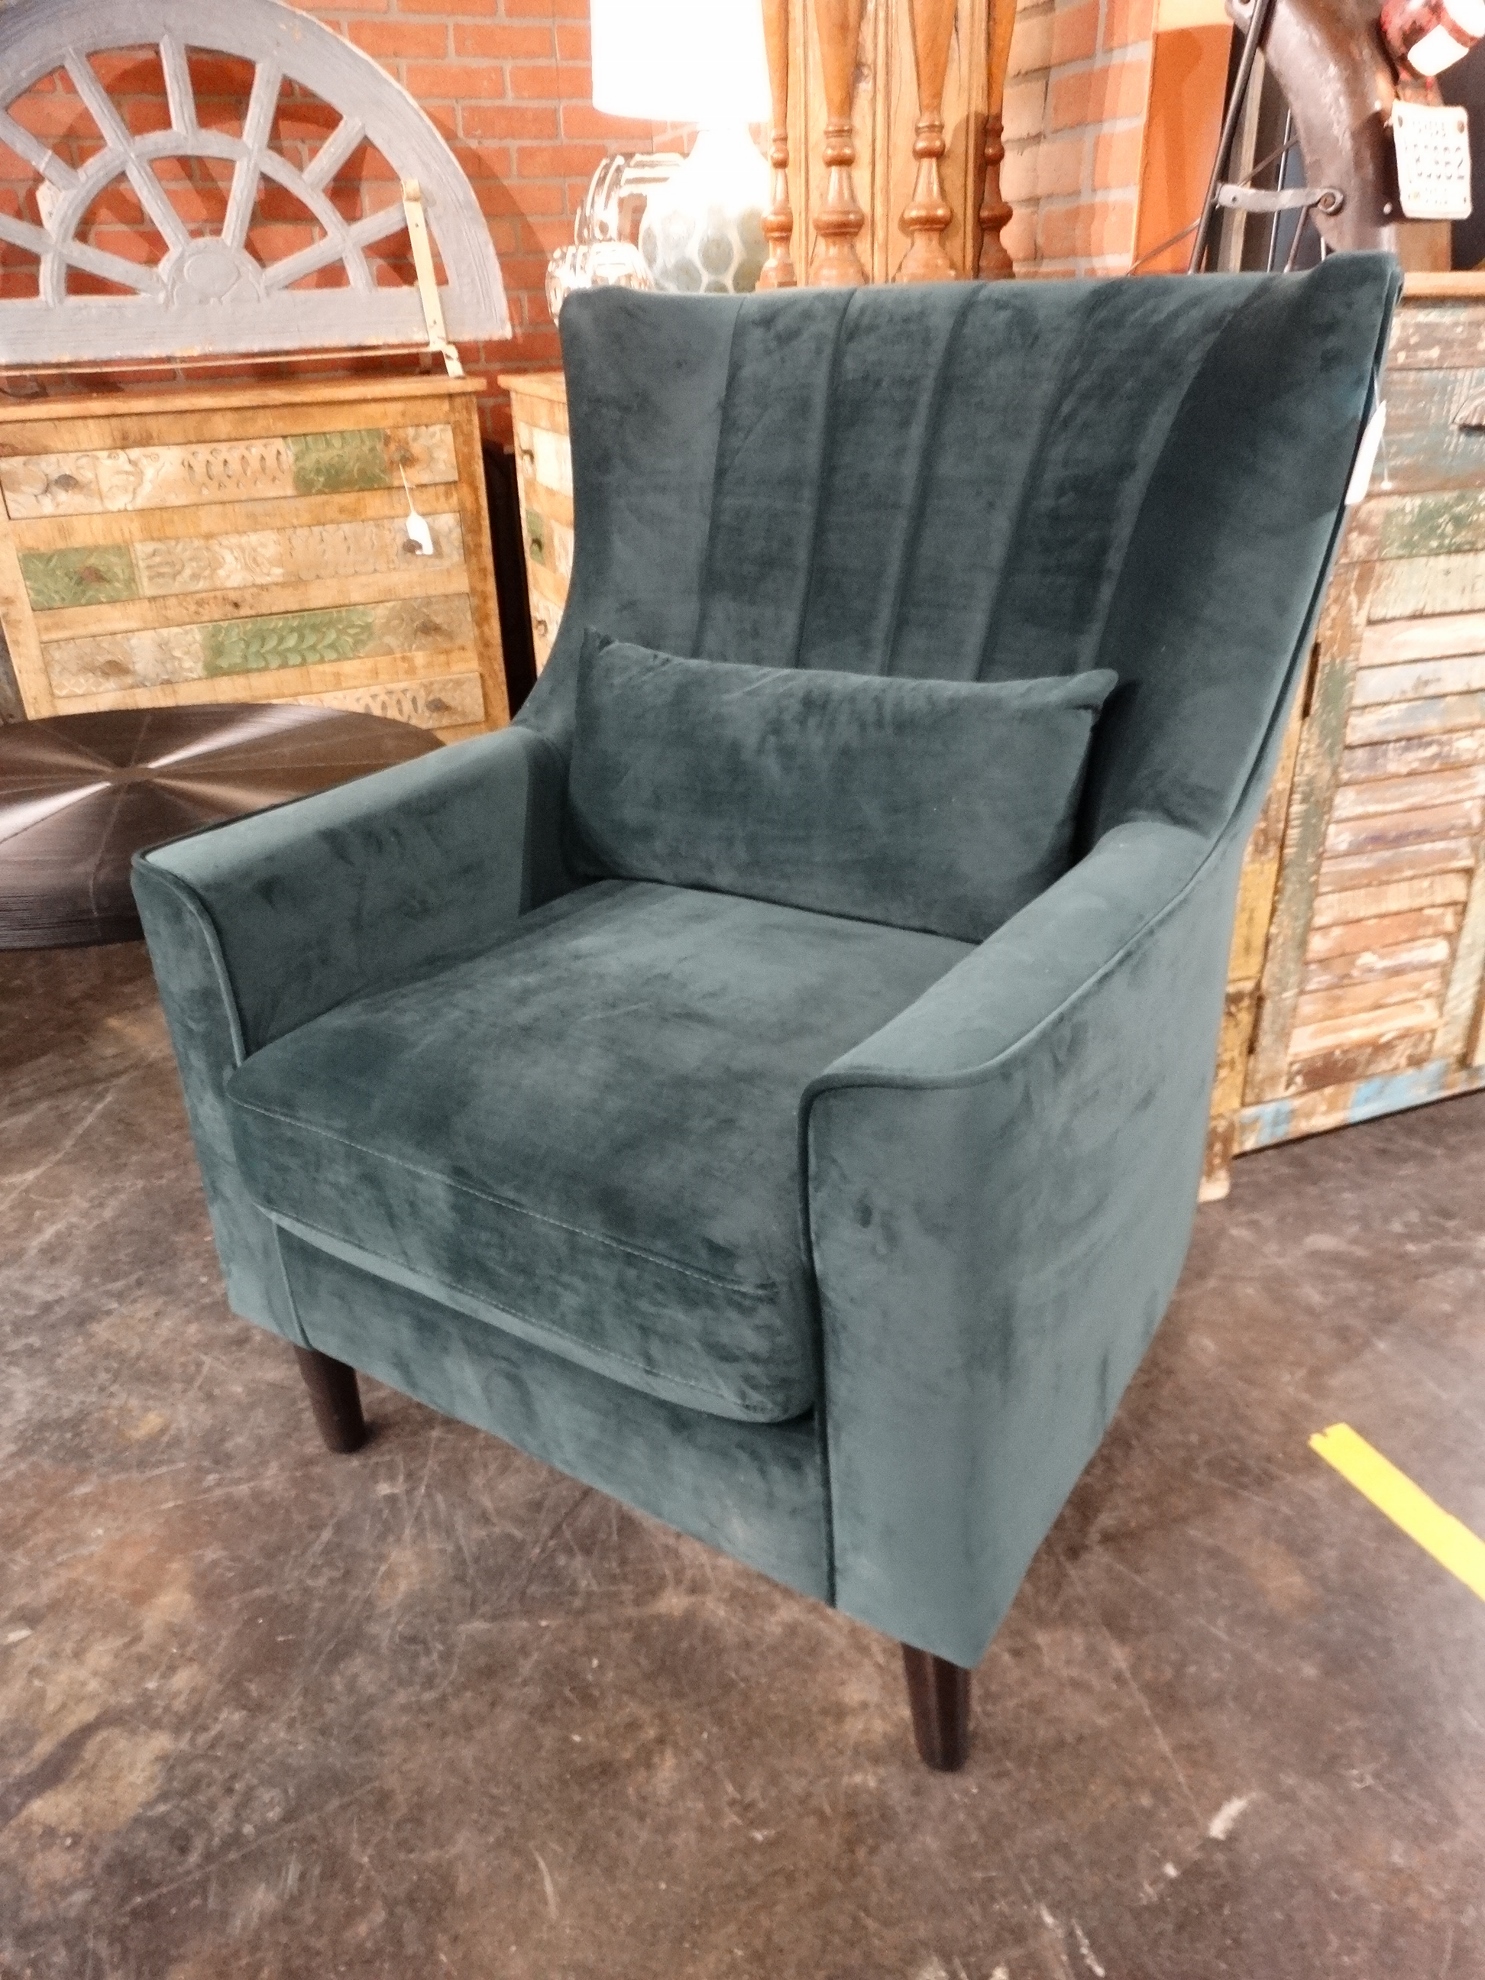 This green Upholstered Chair is soft and has a modern flair.